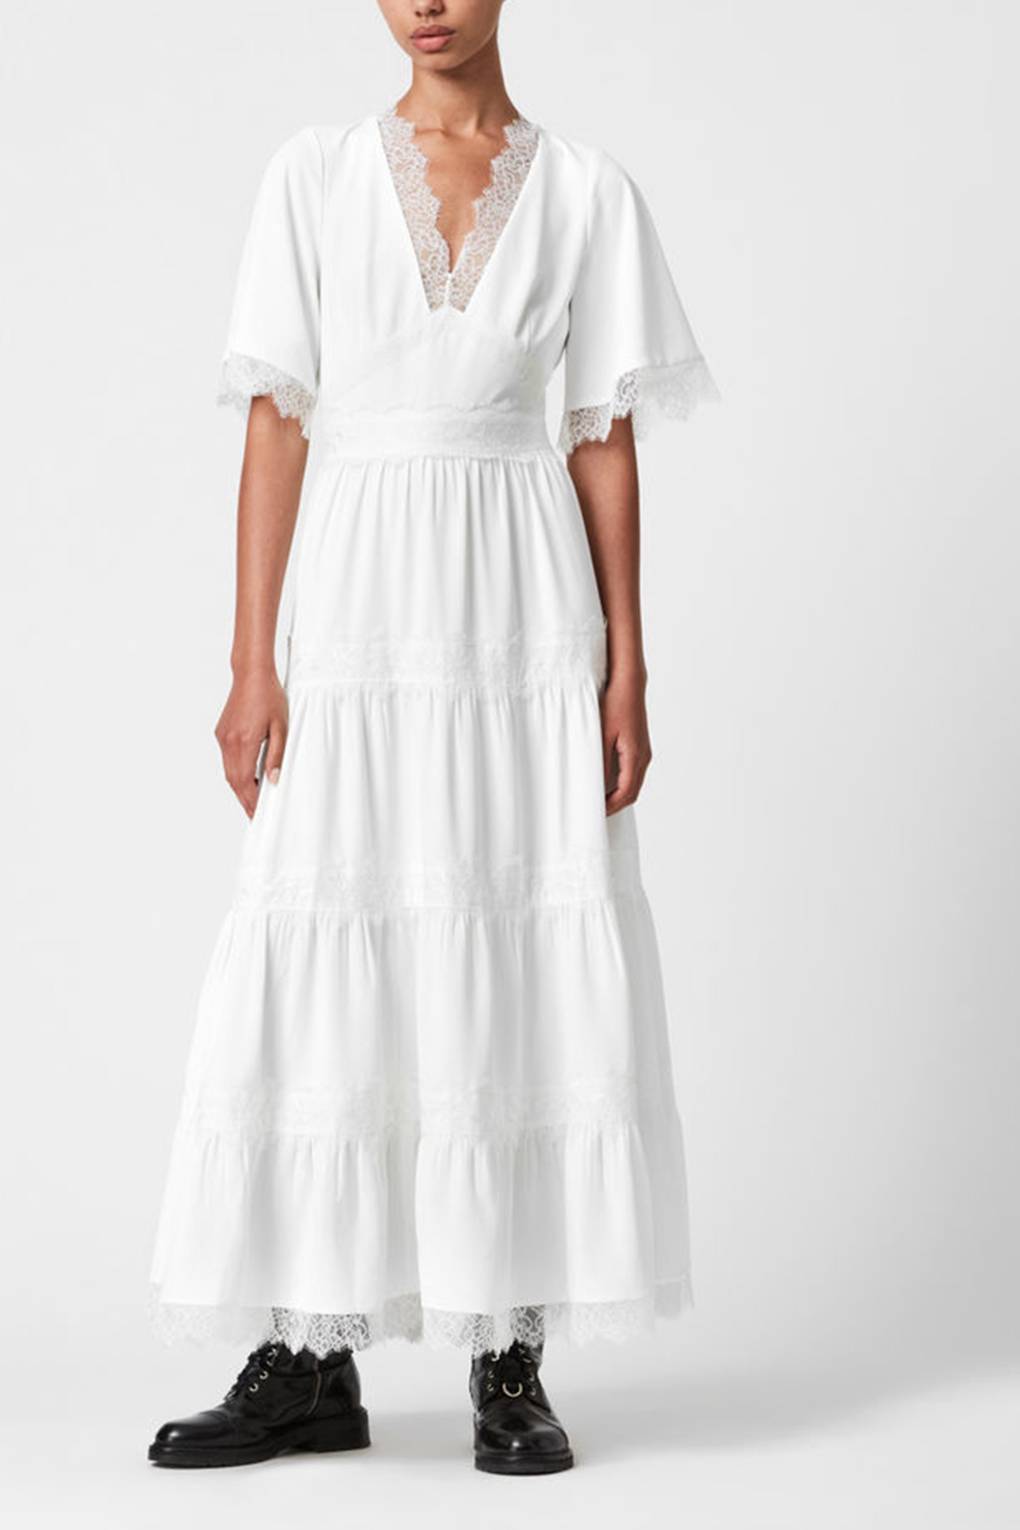 Registry Office Wedding Dresses: Suits & Outfits For Civil Ceremonies ...